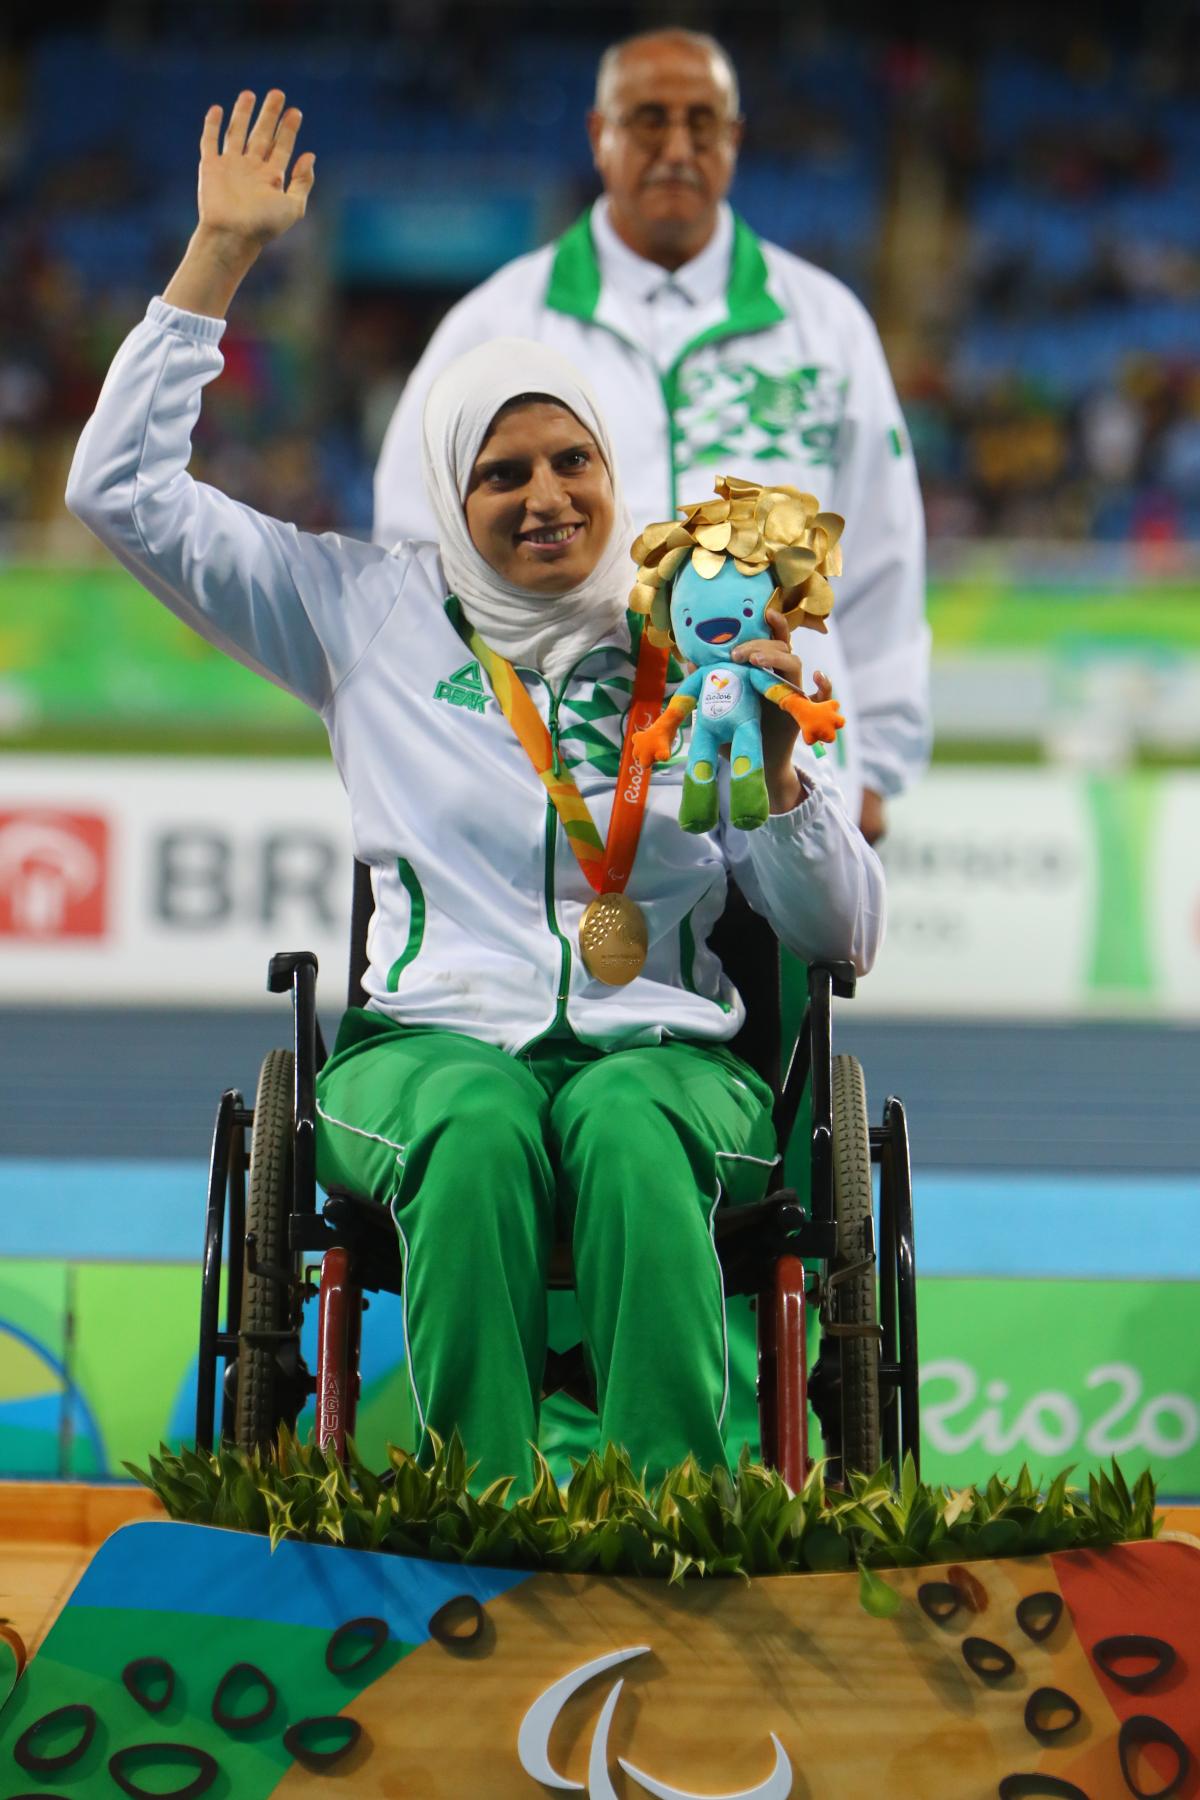 Gold medalist Asmahan Boudjadar of Algeria poses on the podium at the medal ceremony for women's shot put at Rio 2016.